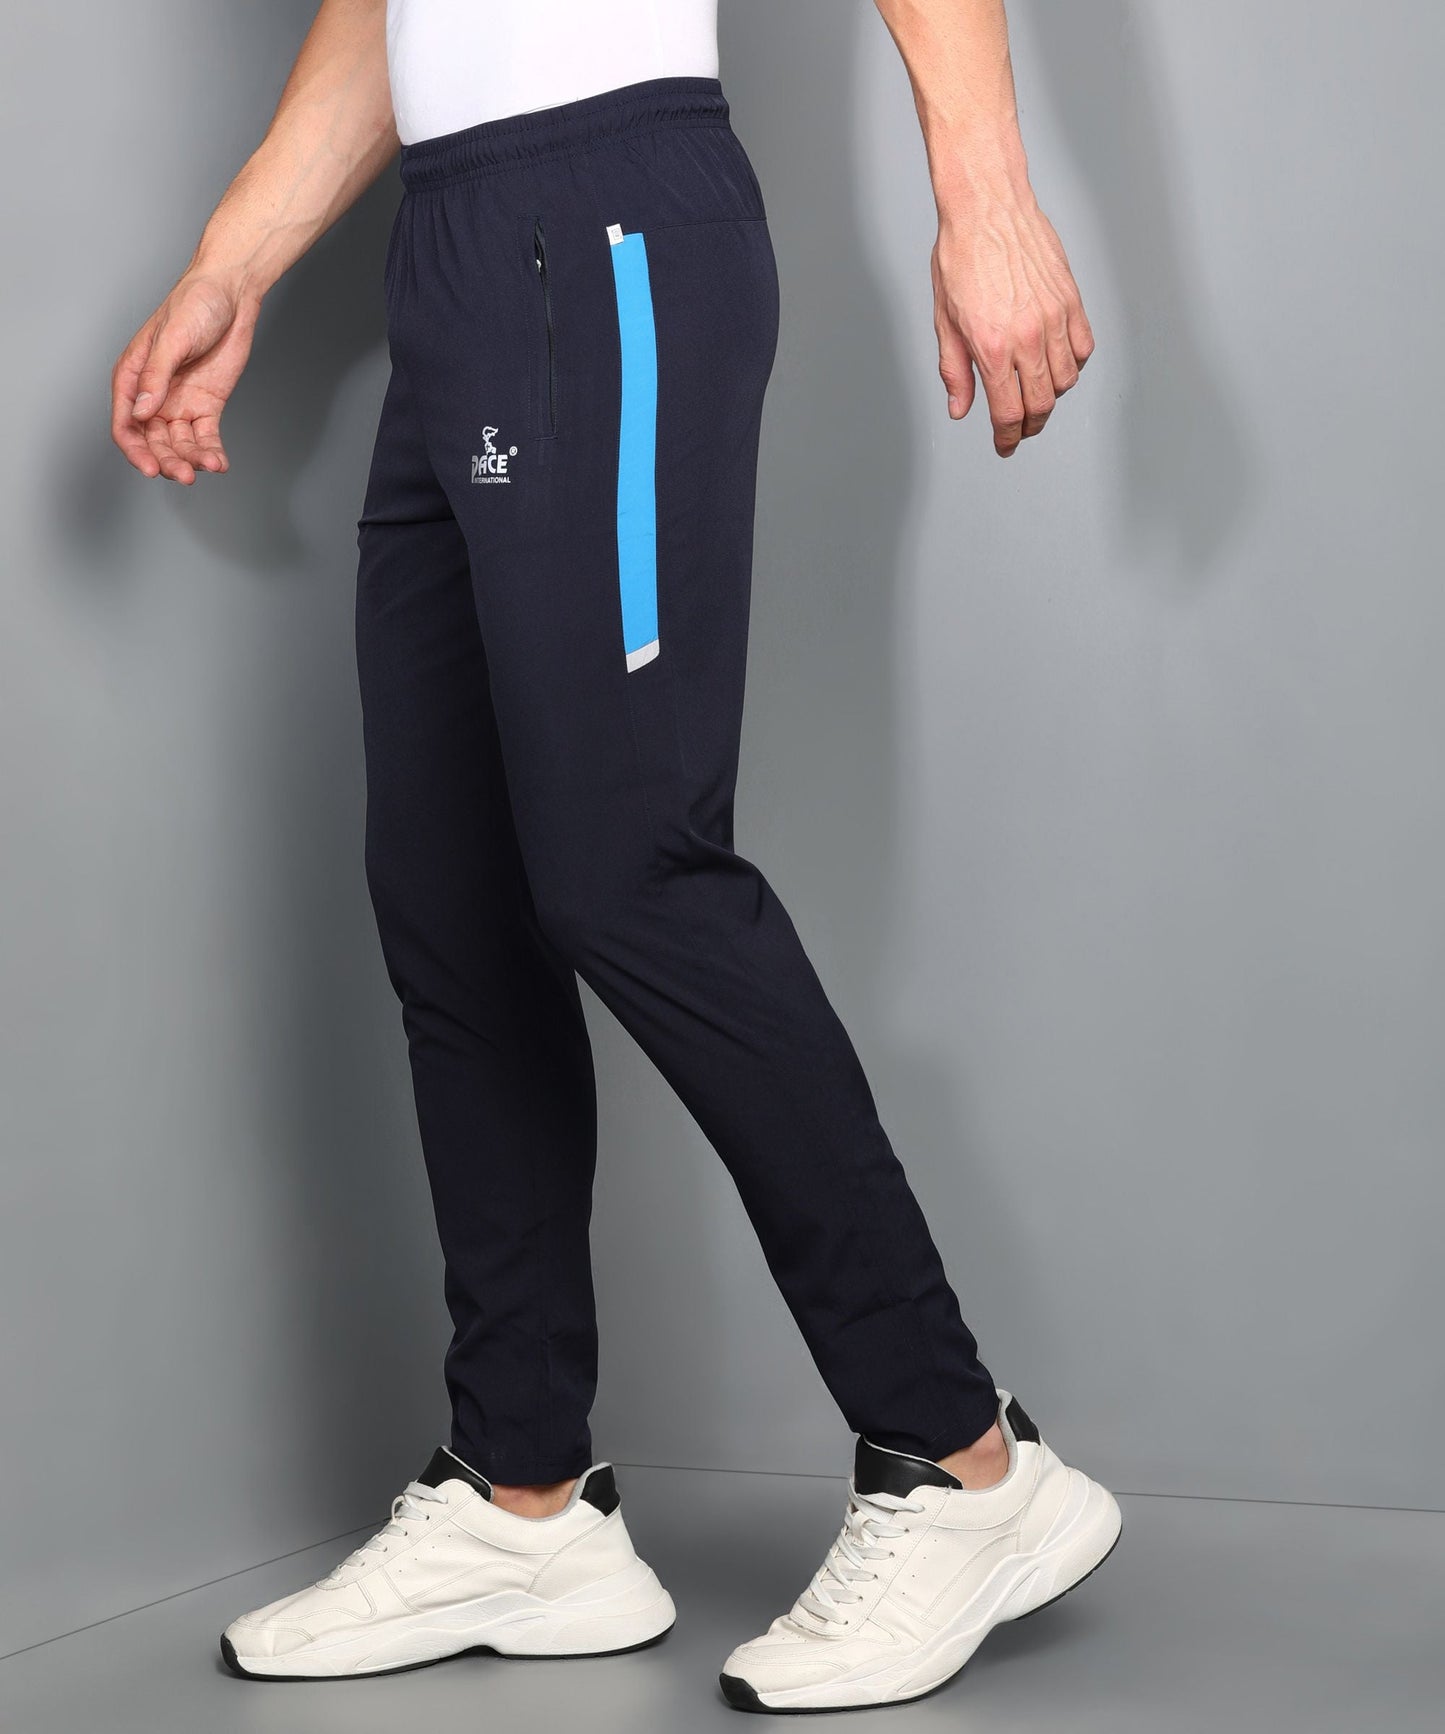 7 Best Gym Track Pants for men in India - YouTube